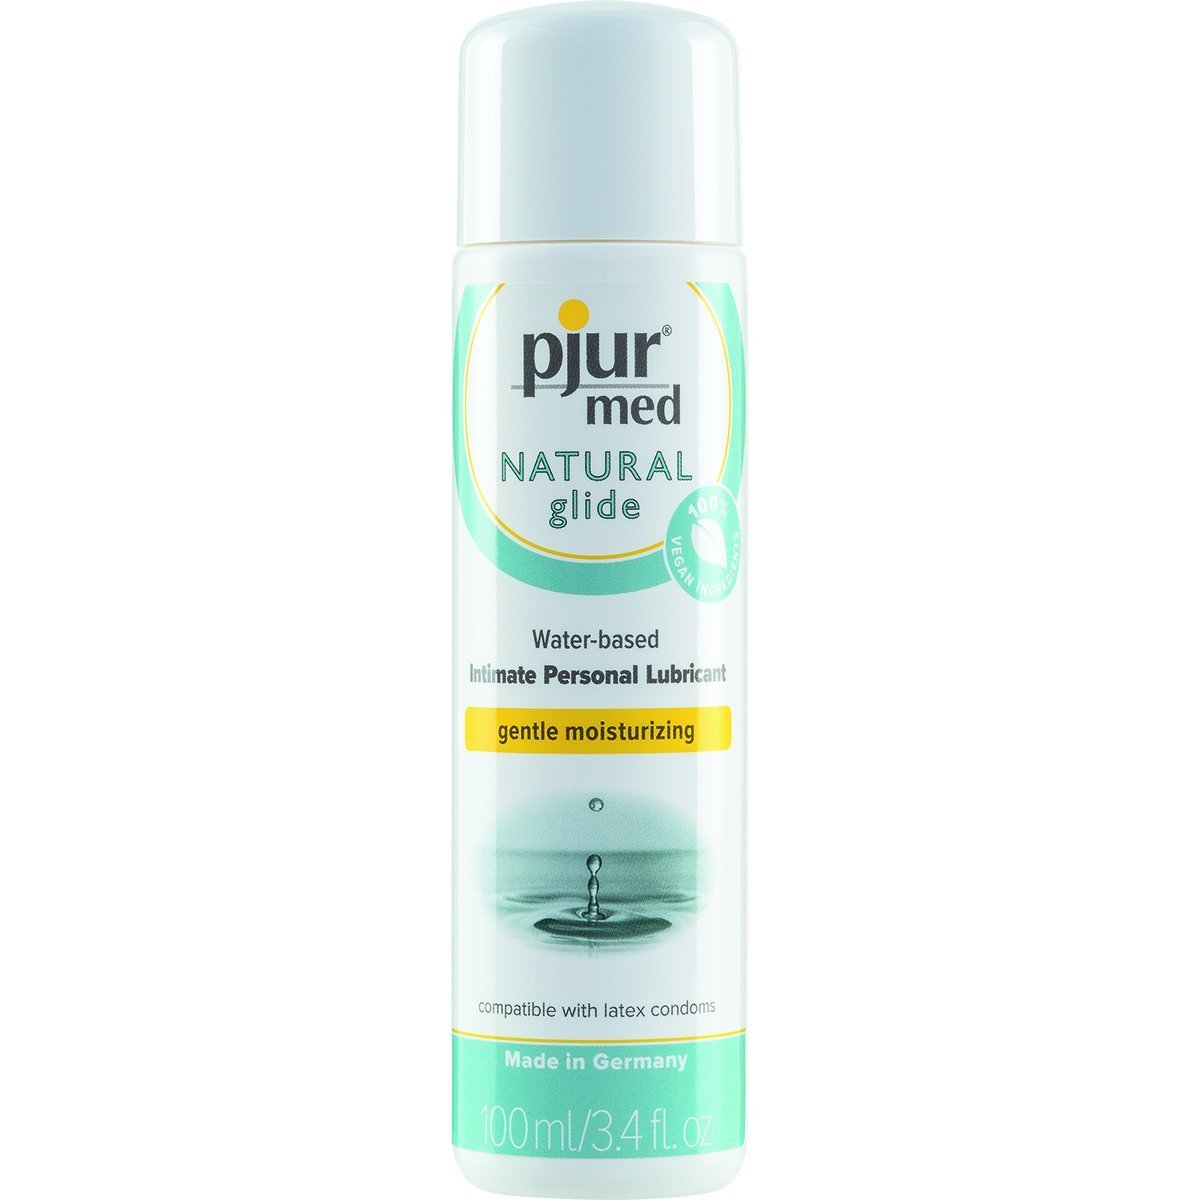 Pjur Med Natural Lubricant - 3.4 oz - Lube, Toy Care and Better Sex